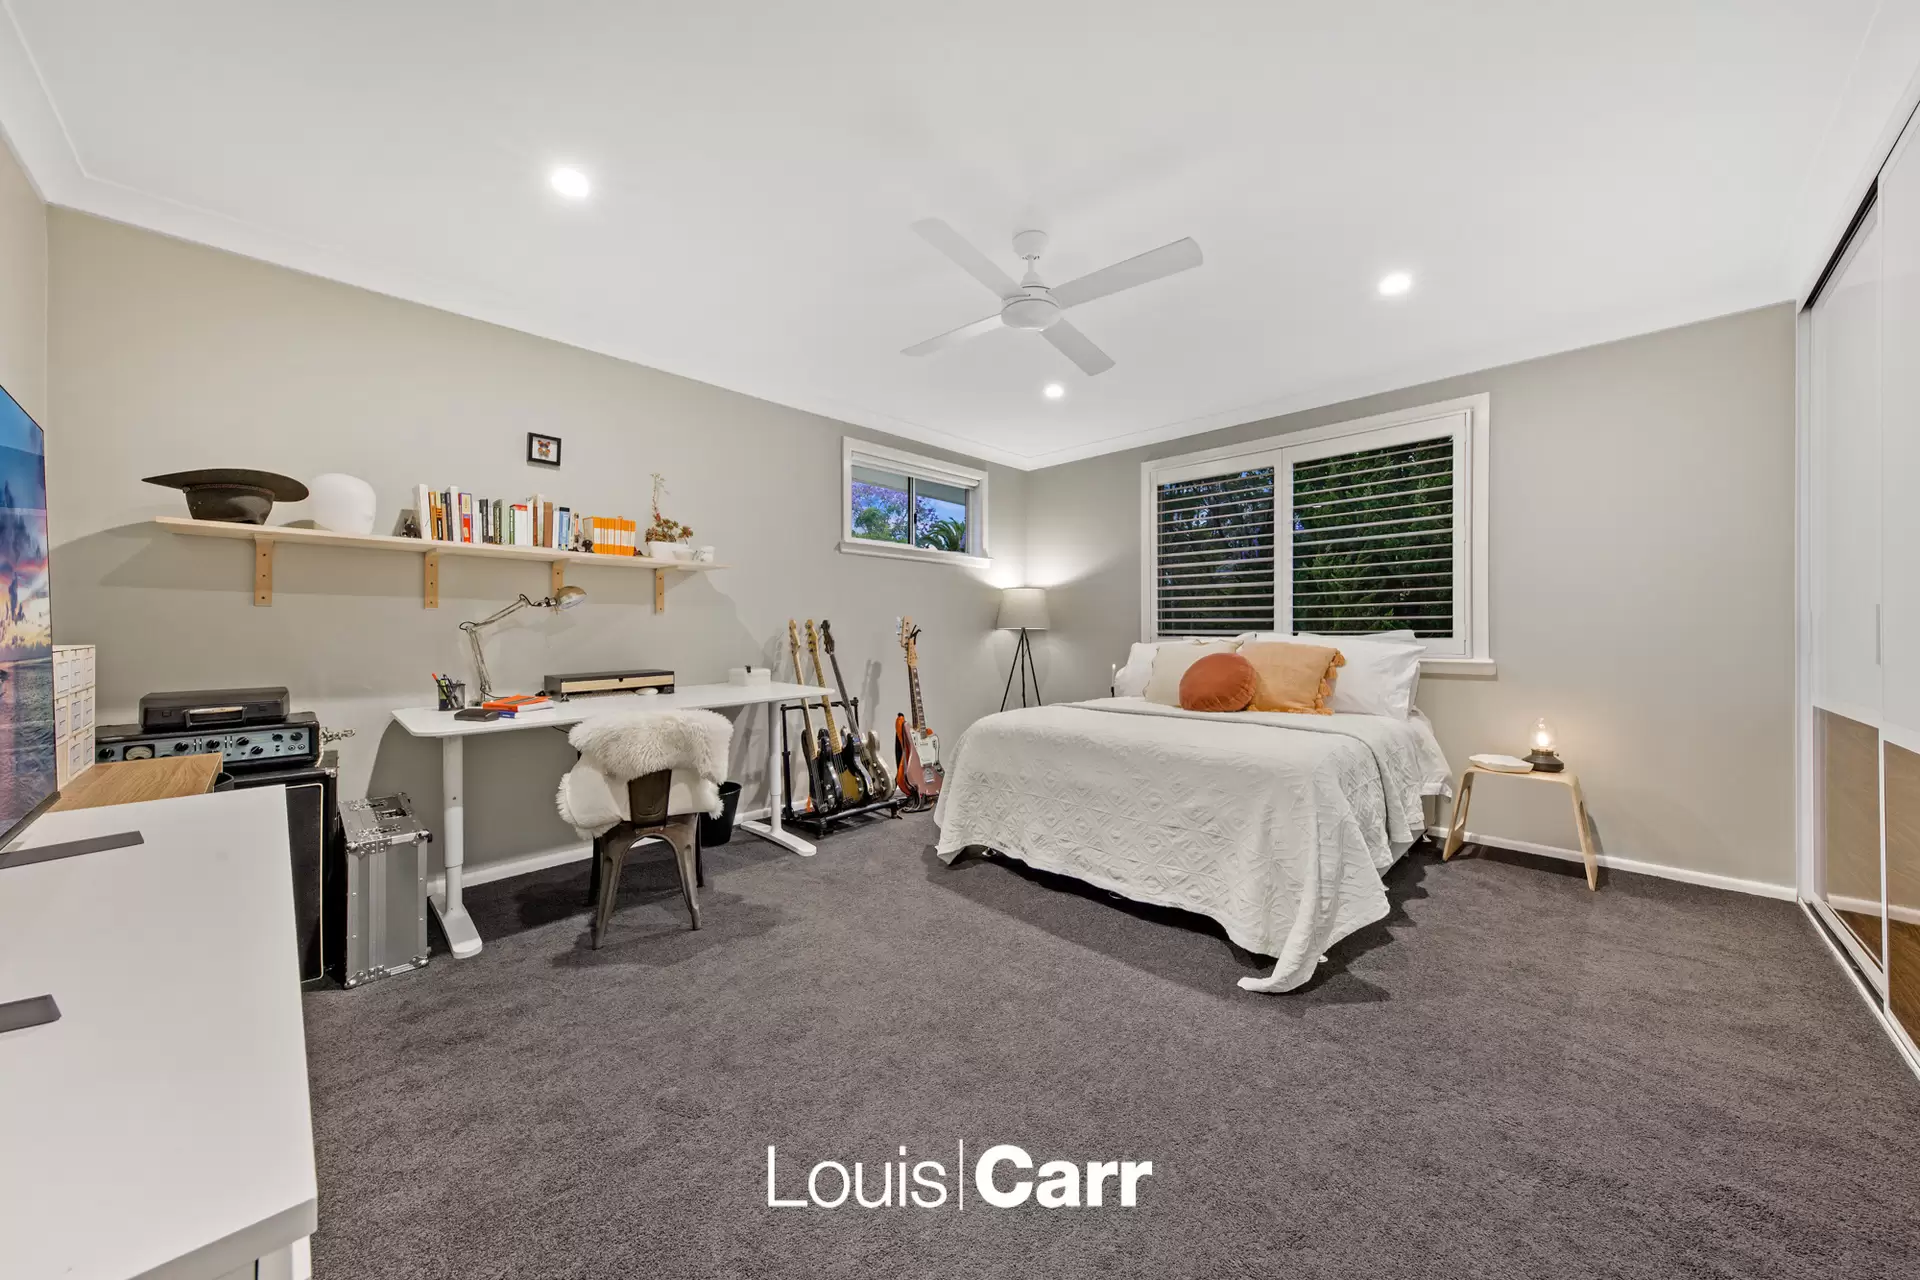 Photo #14: 47 Cambewarra Avenue, Castle Hill - For Sale by Louis Carr Real Estate